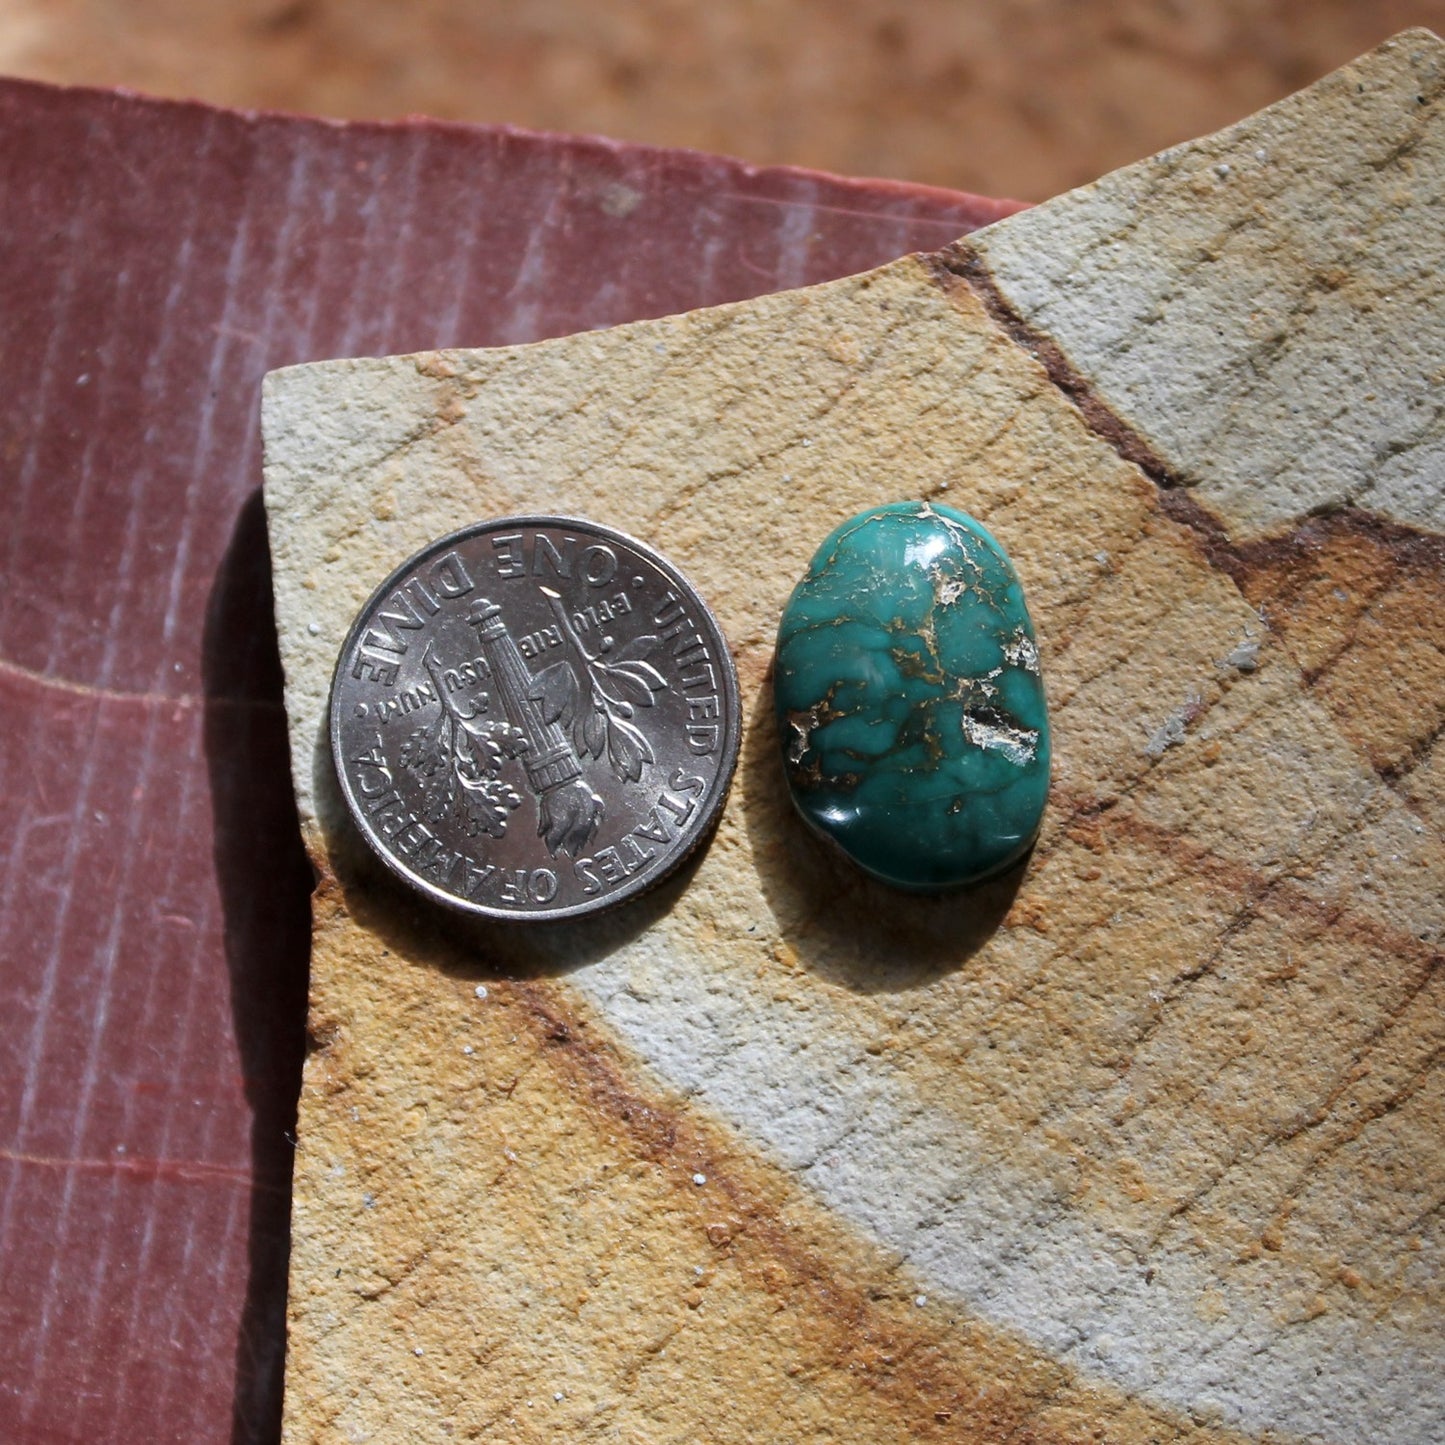 6.9 carat deep blue teal Stone Mountain Turquoise cabochon